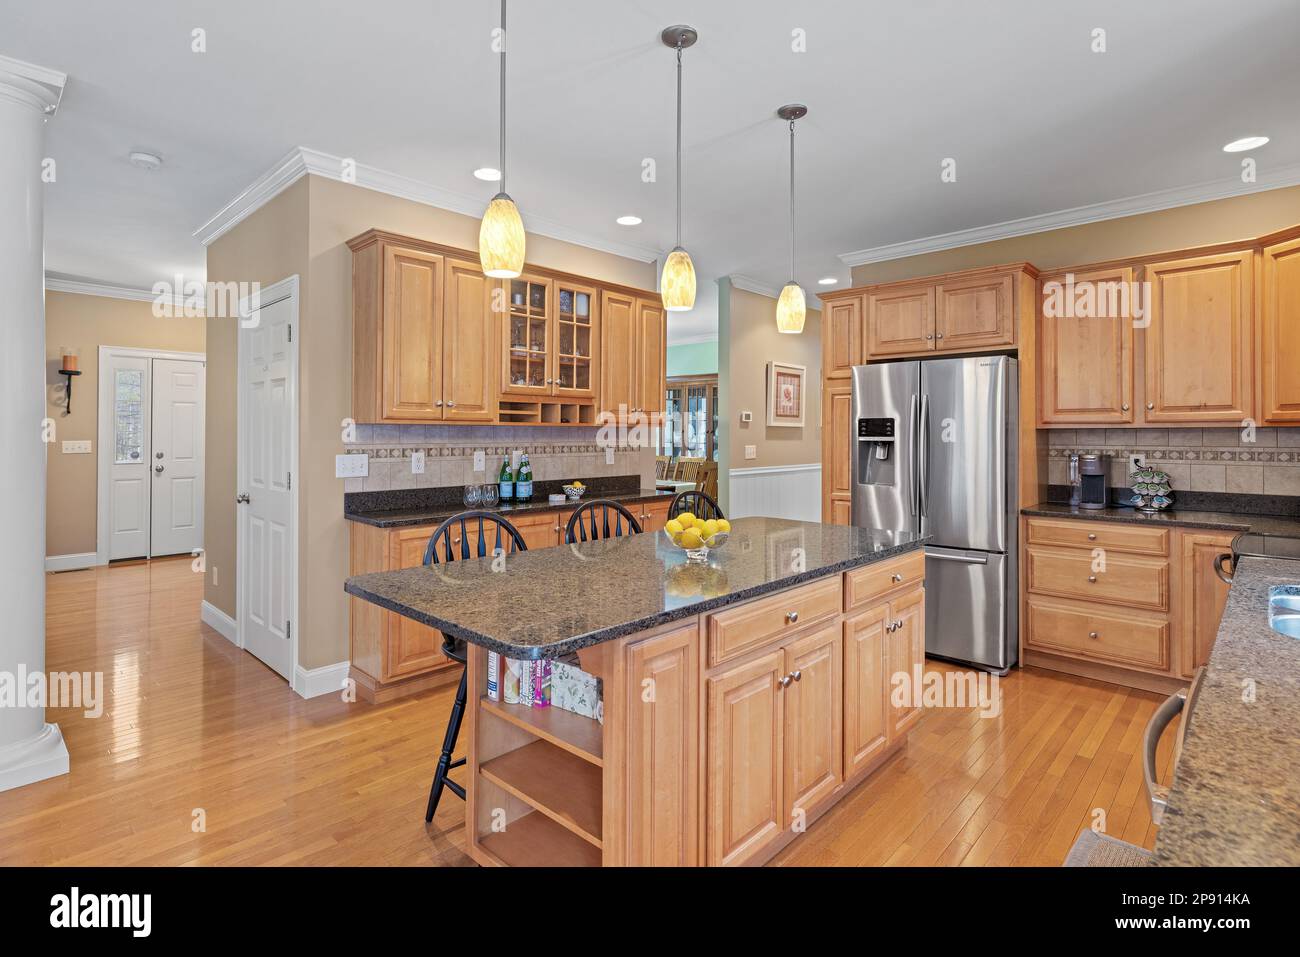 A large kitchen with brown modern furniture and hanging lamps Stock Photo